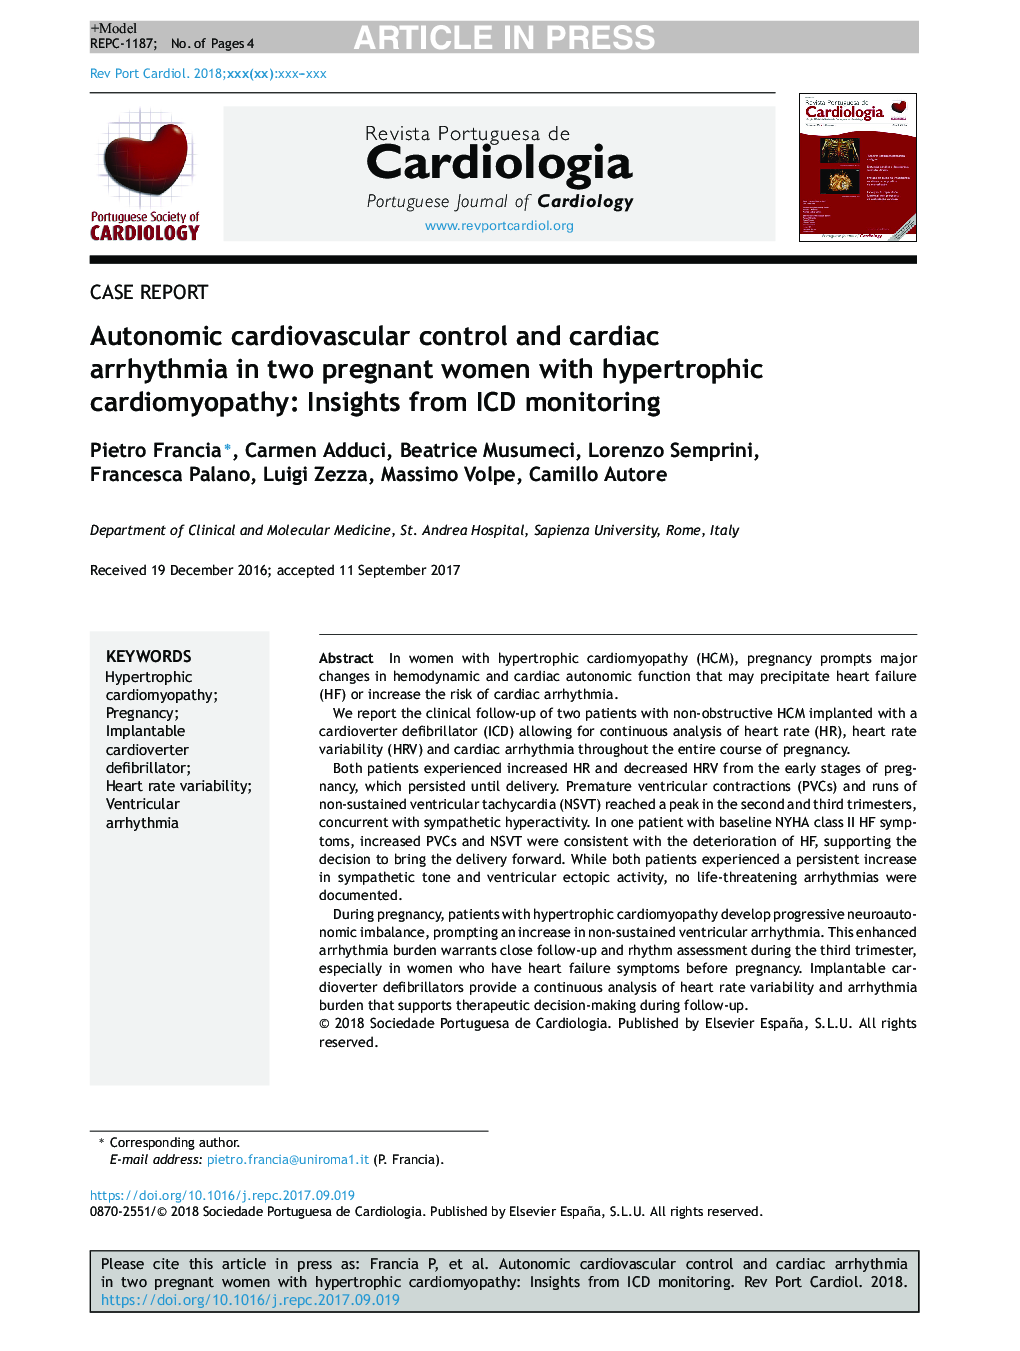 Autonomic cardiovascular control and cardiac arrhythmia in two pregnant women with hypertrophic cardiomyopathy: Insights from ICD monitoring